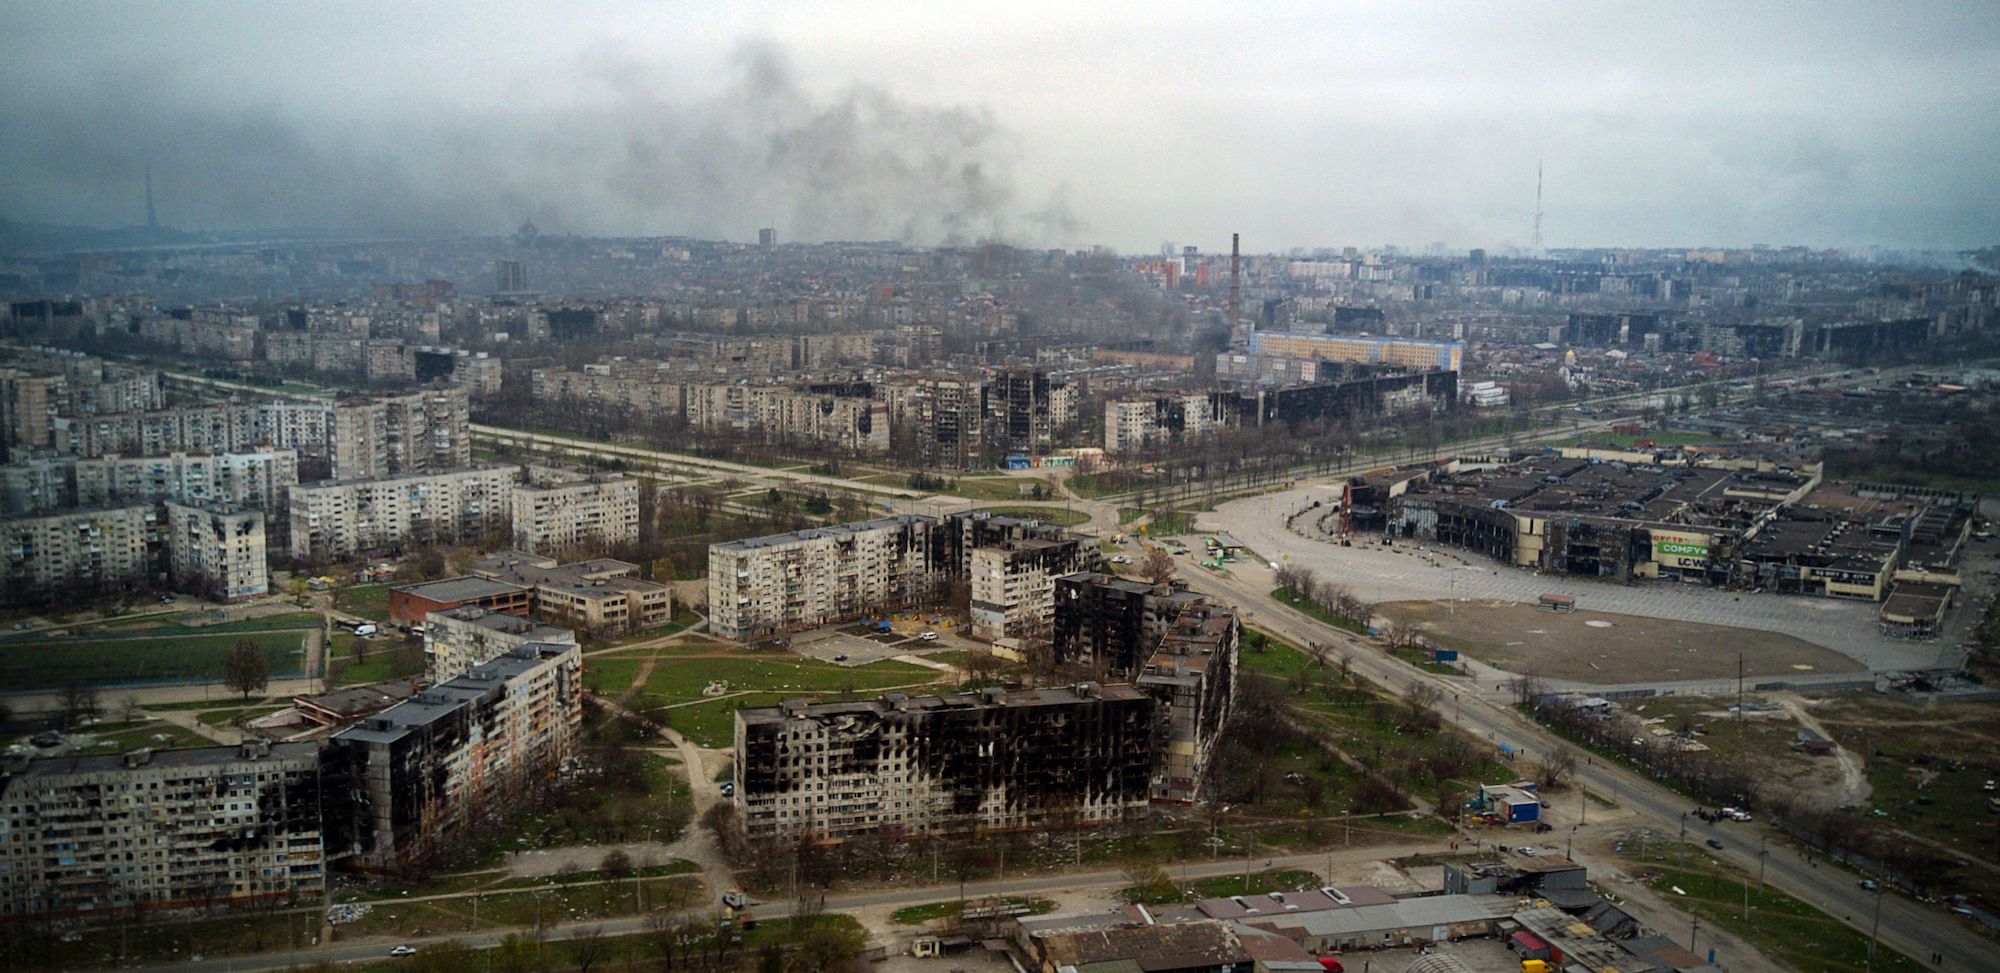 An aerial view of Mariupol on April 12, 2022.